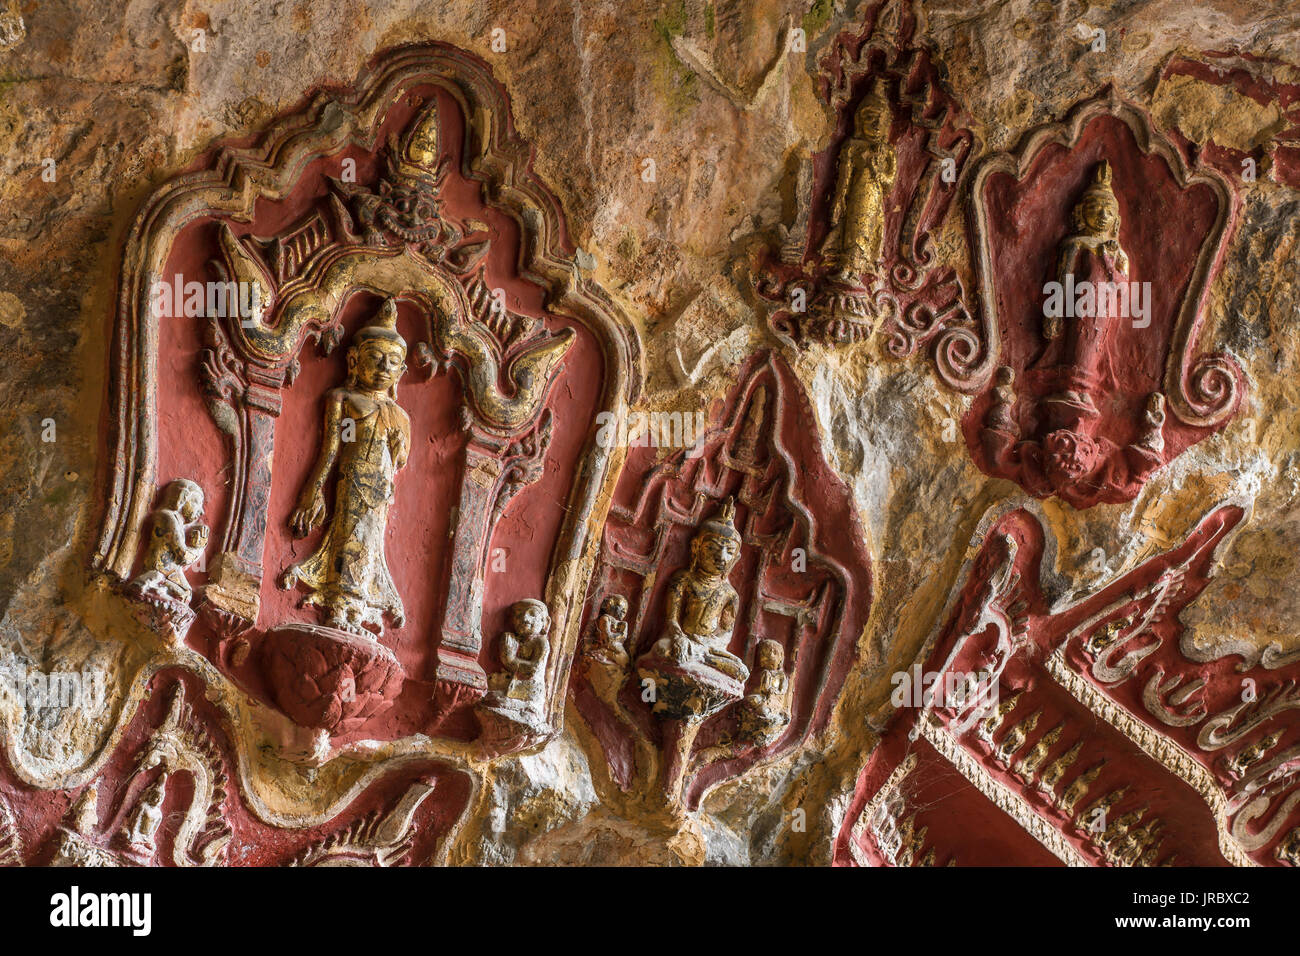 Old temple with Buddhas statues and religious carving on limestone rock in sacred Kaw Goon cave near Hpa-An in Myanmar (Burma) Stock Photo